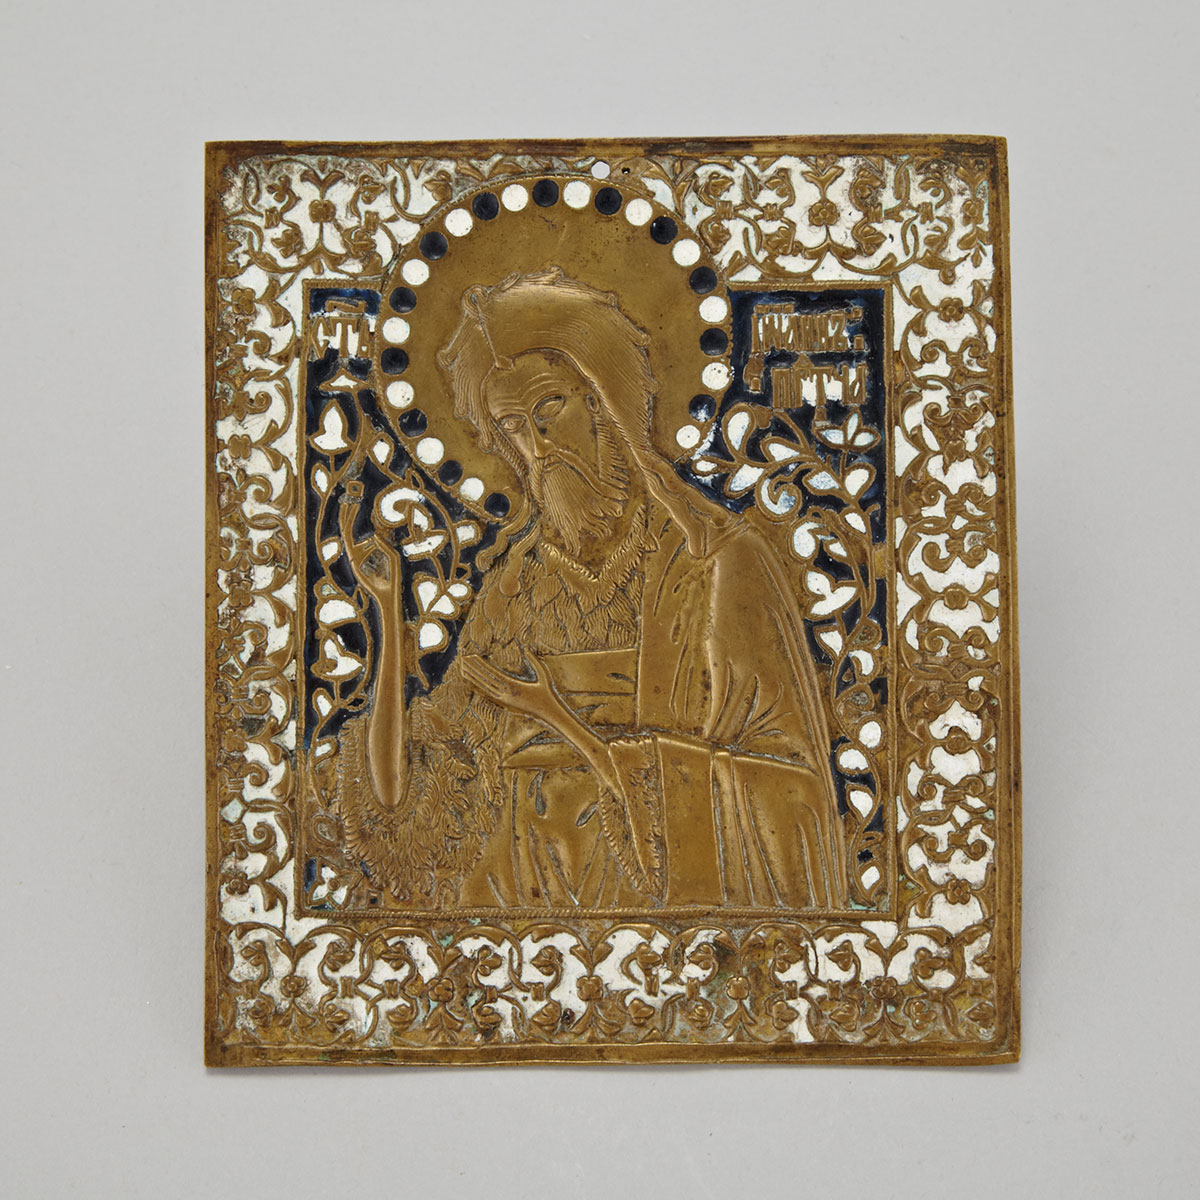 Russian Polychrome Enamelled Bronze Travelling Icon of St. John, 19th century